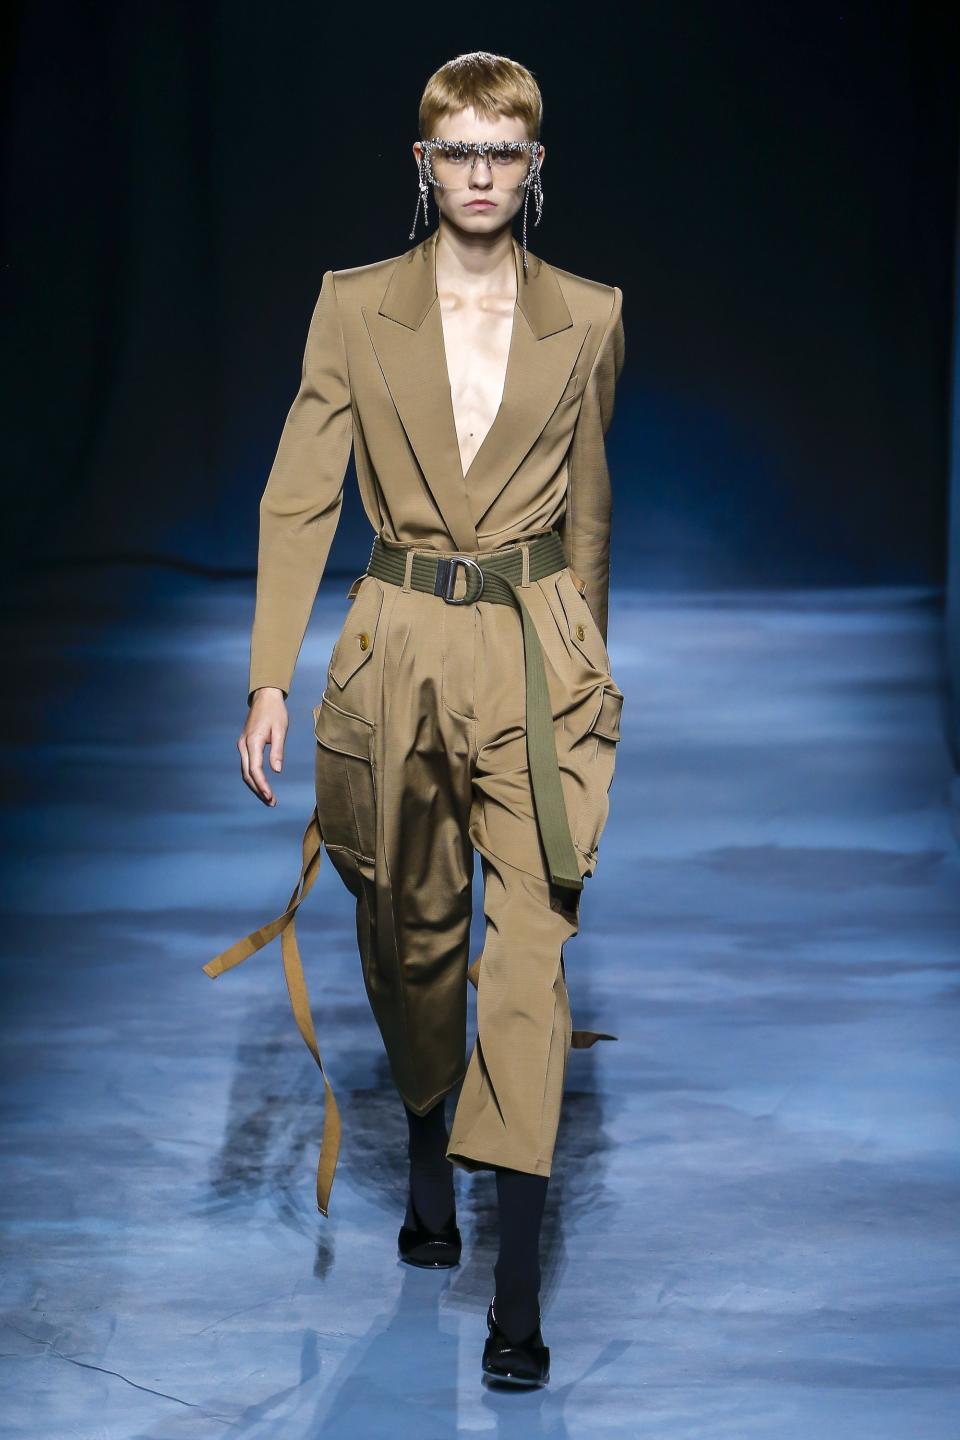 After the Spring 2019 fashion shows, Vogue is declaring these the most game-changing trends of Spring 2019, from boxy blazers to a new kind of couture.